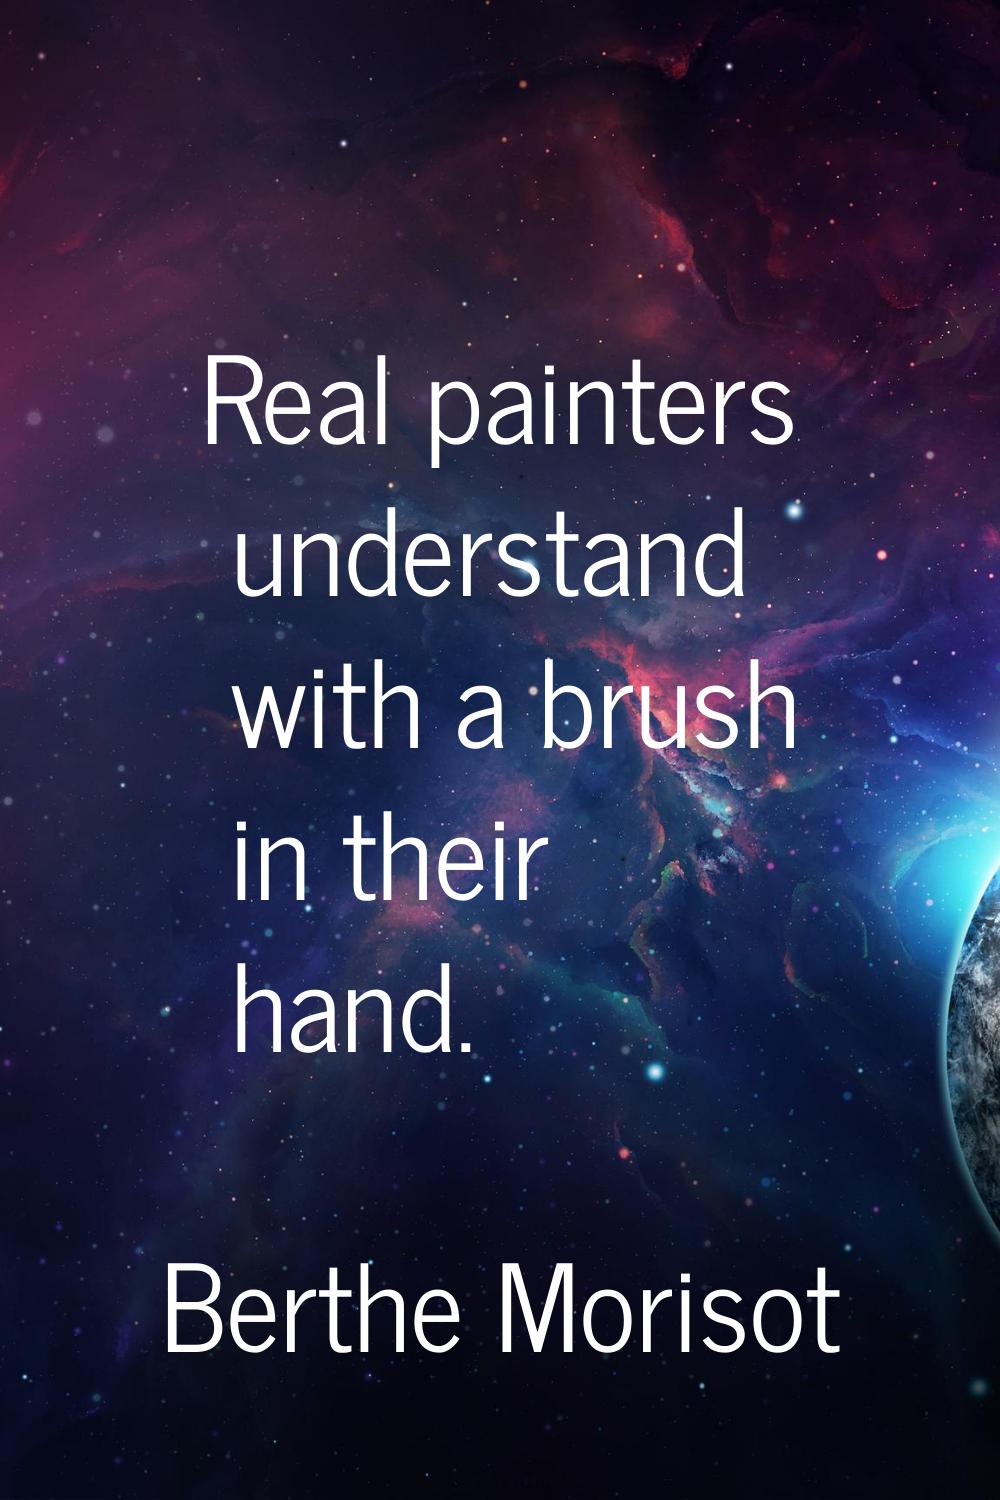 Real painters understand with a brush in their hand.